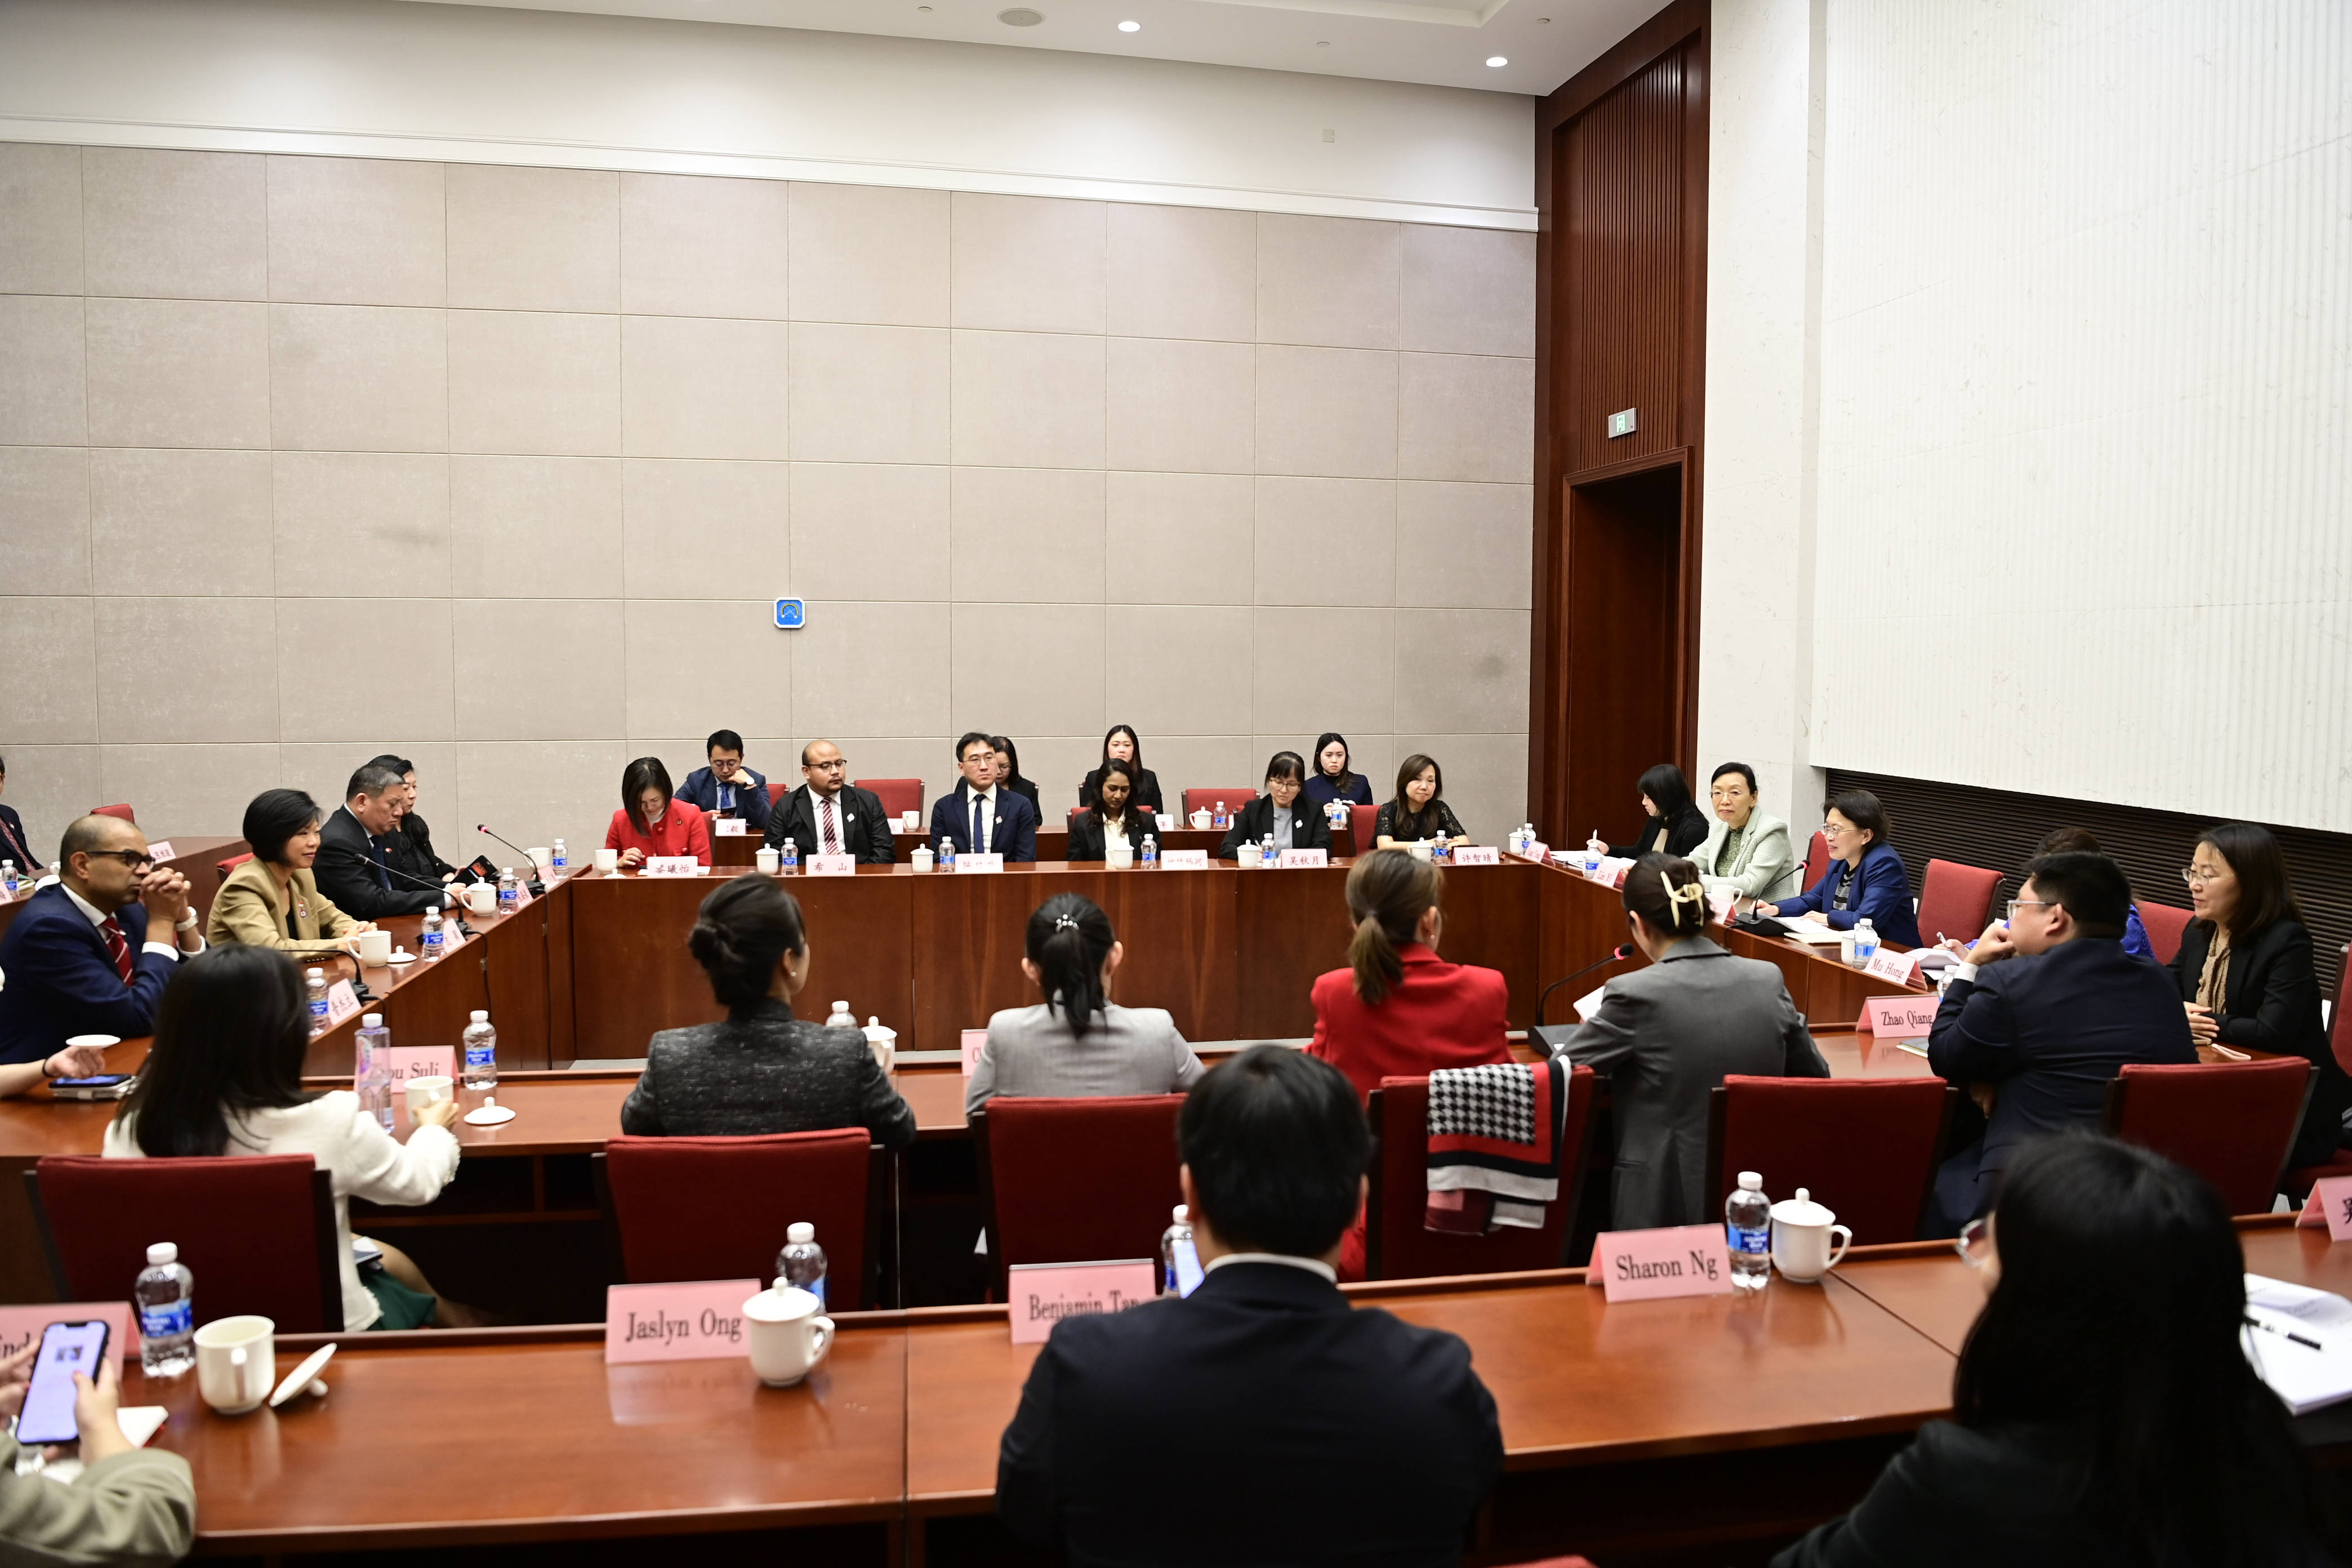 Huang Meets Delegation of Singapore's PAP Women's Wing and Young PAP